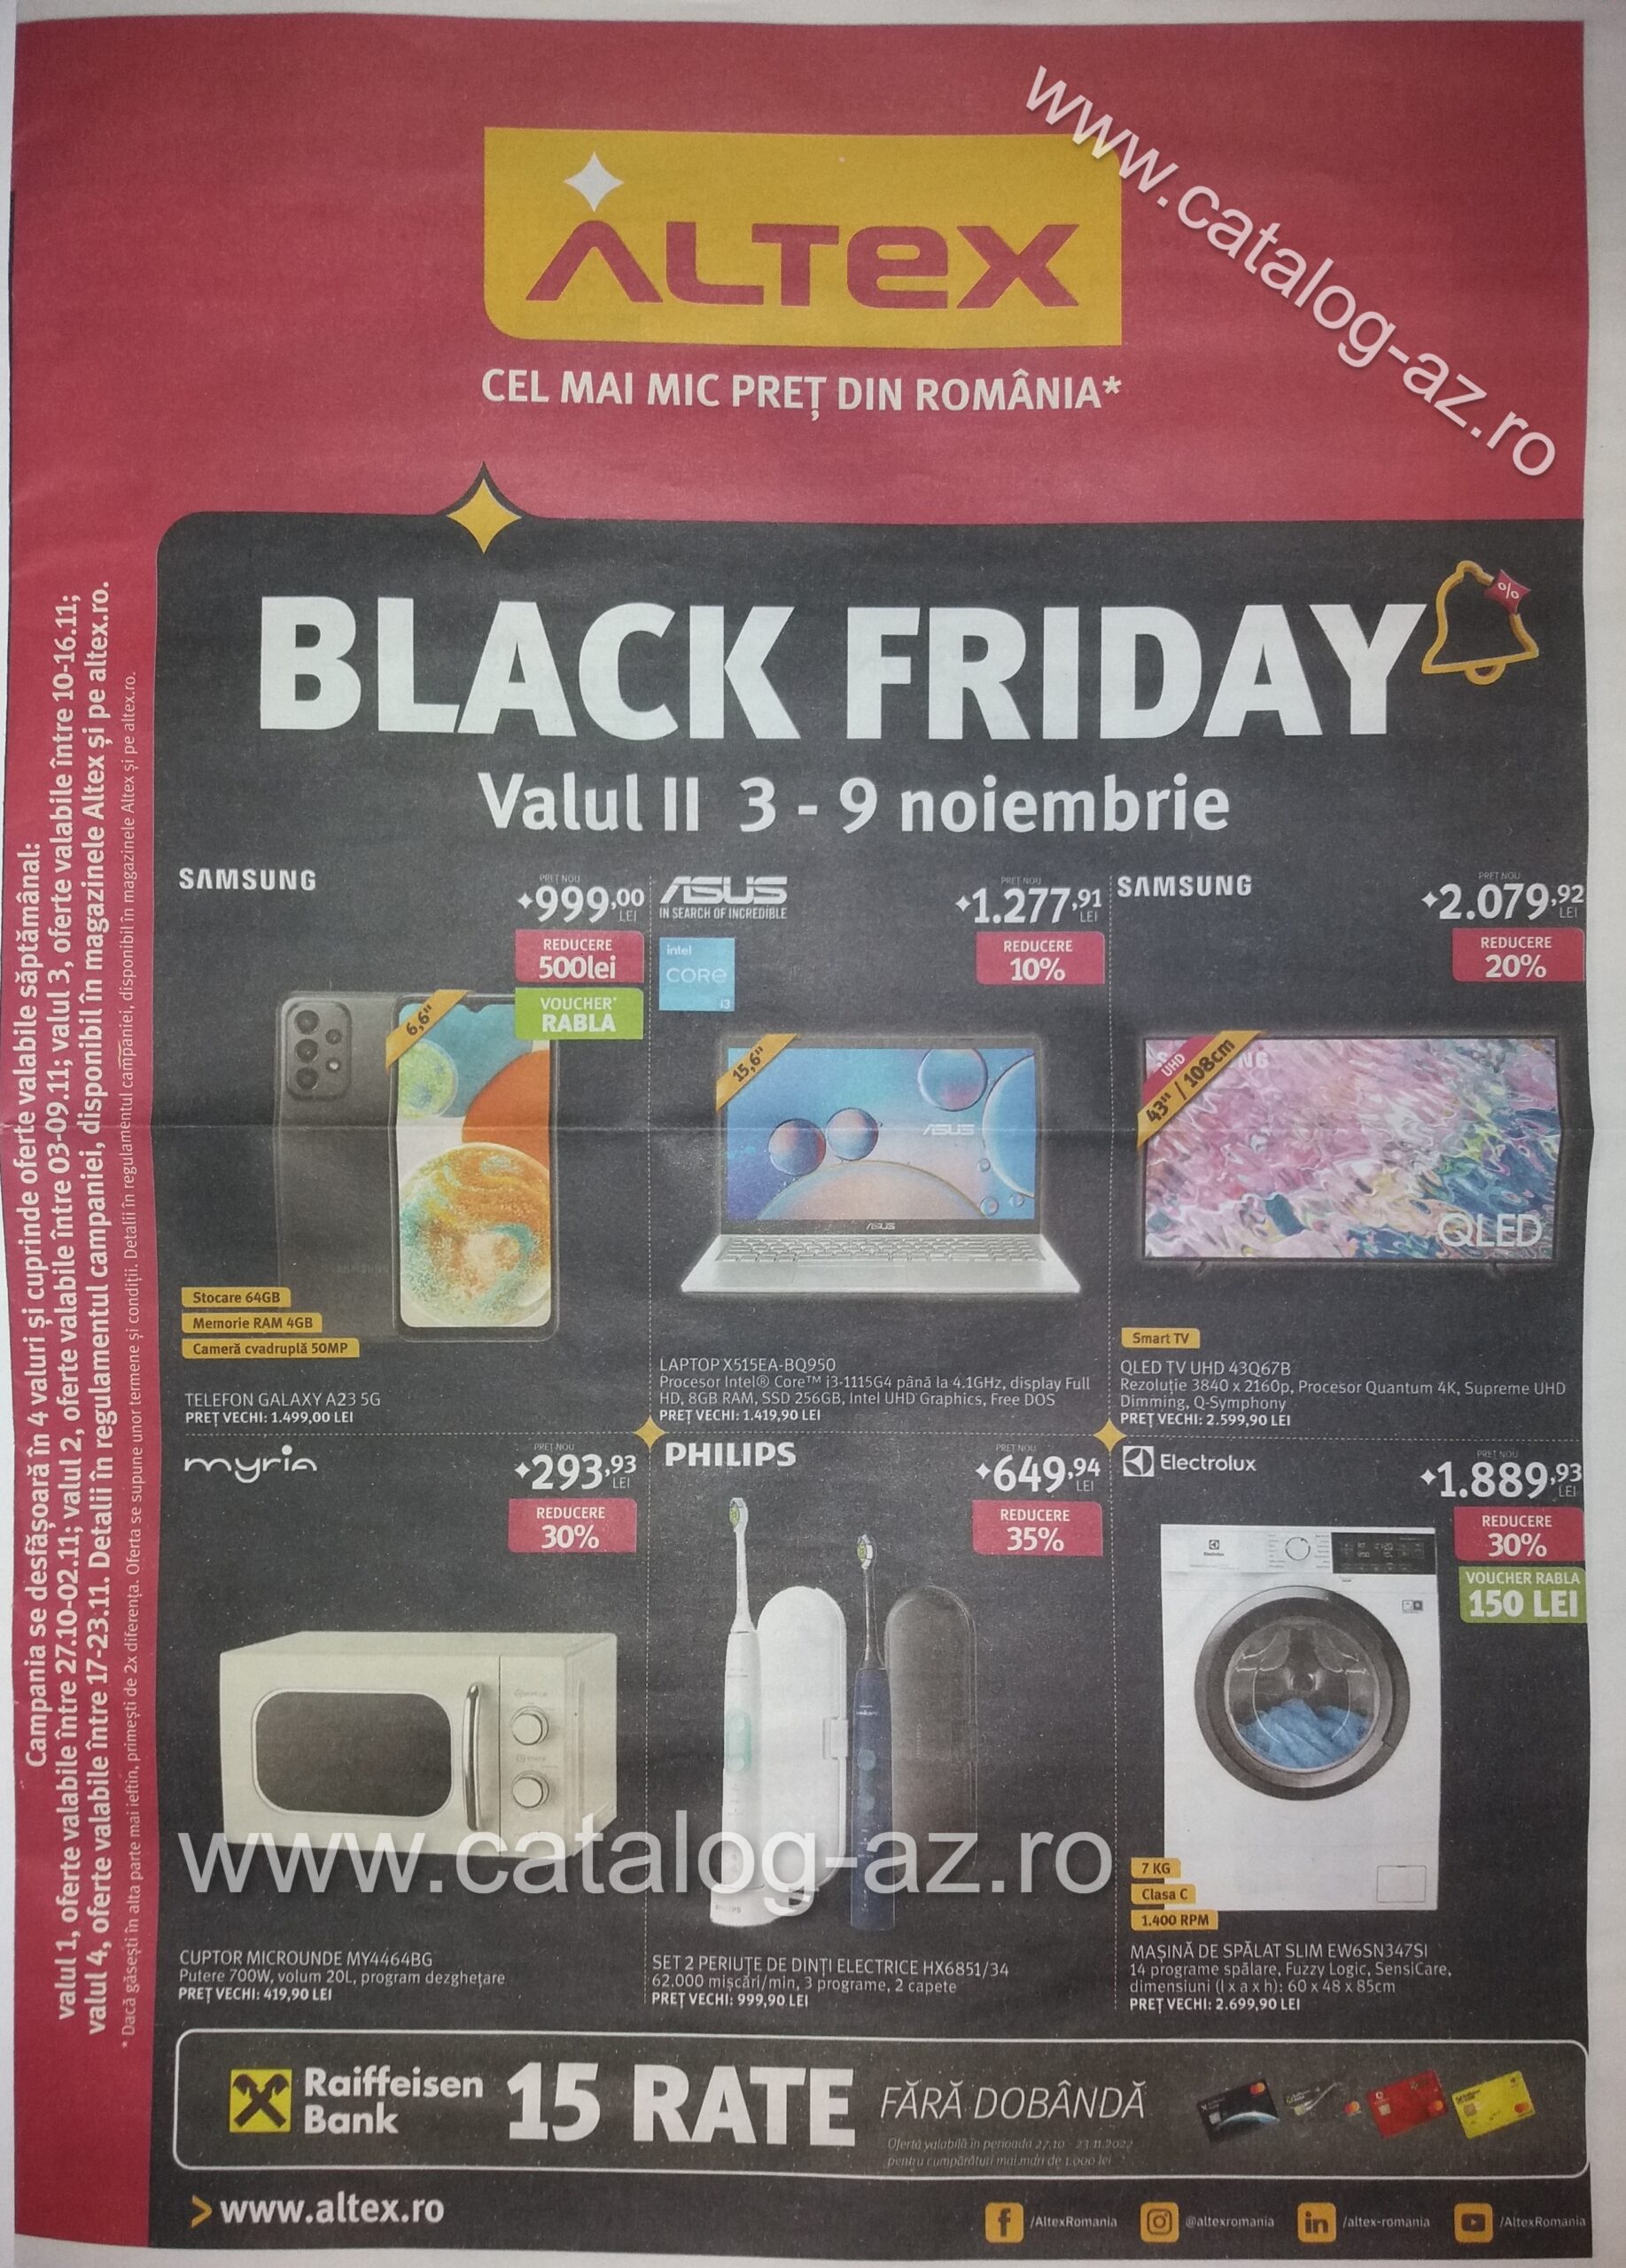 Amazing Emphasis Geography Televizoare Altex Black Friday 2022 Catalog Valul II 3-9 Noiembrie